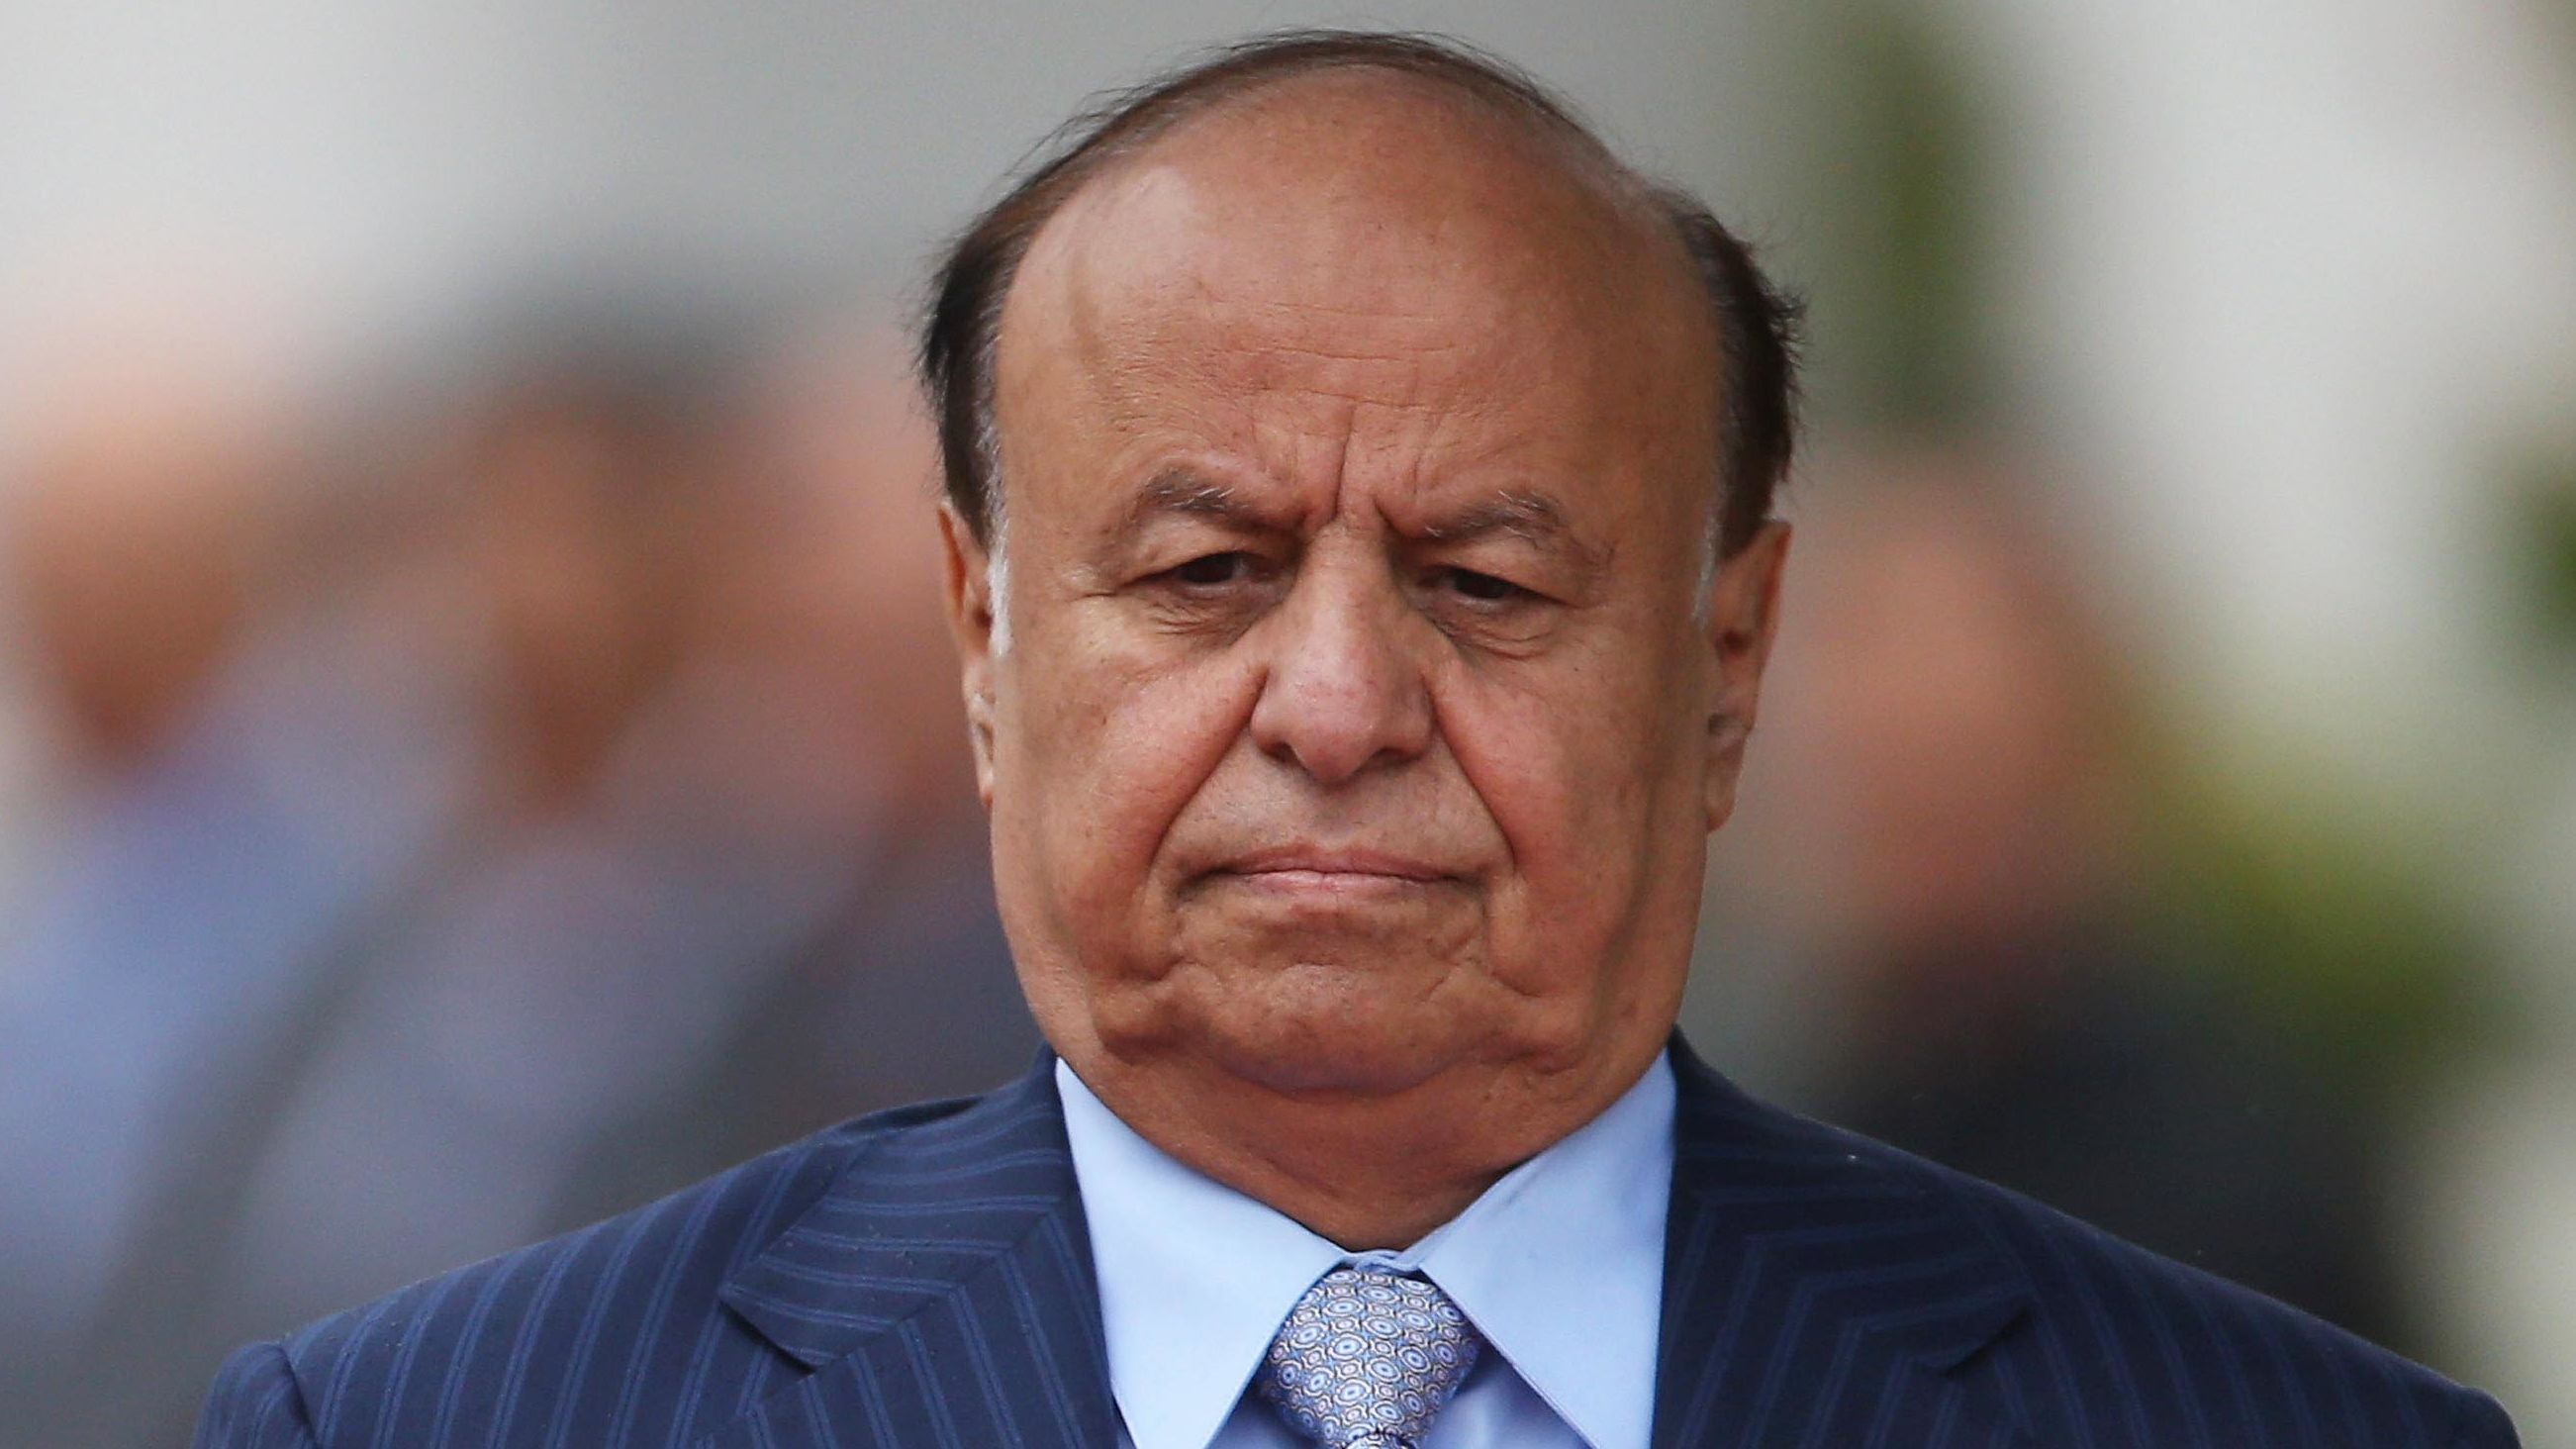 Houthi airstrikes hit near deposed President Abdu Rabu Mansour Hadi's palace, but officials reported no injuries.